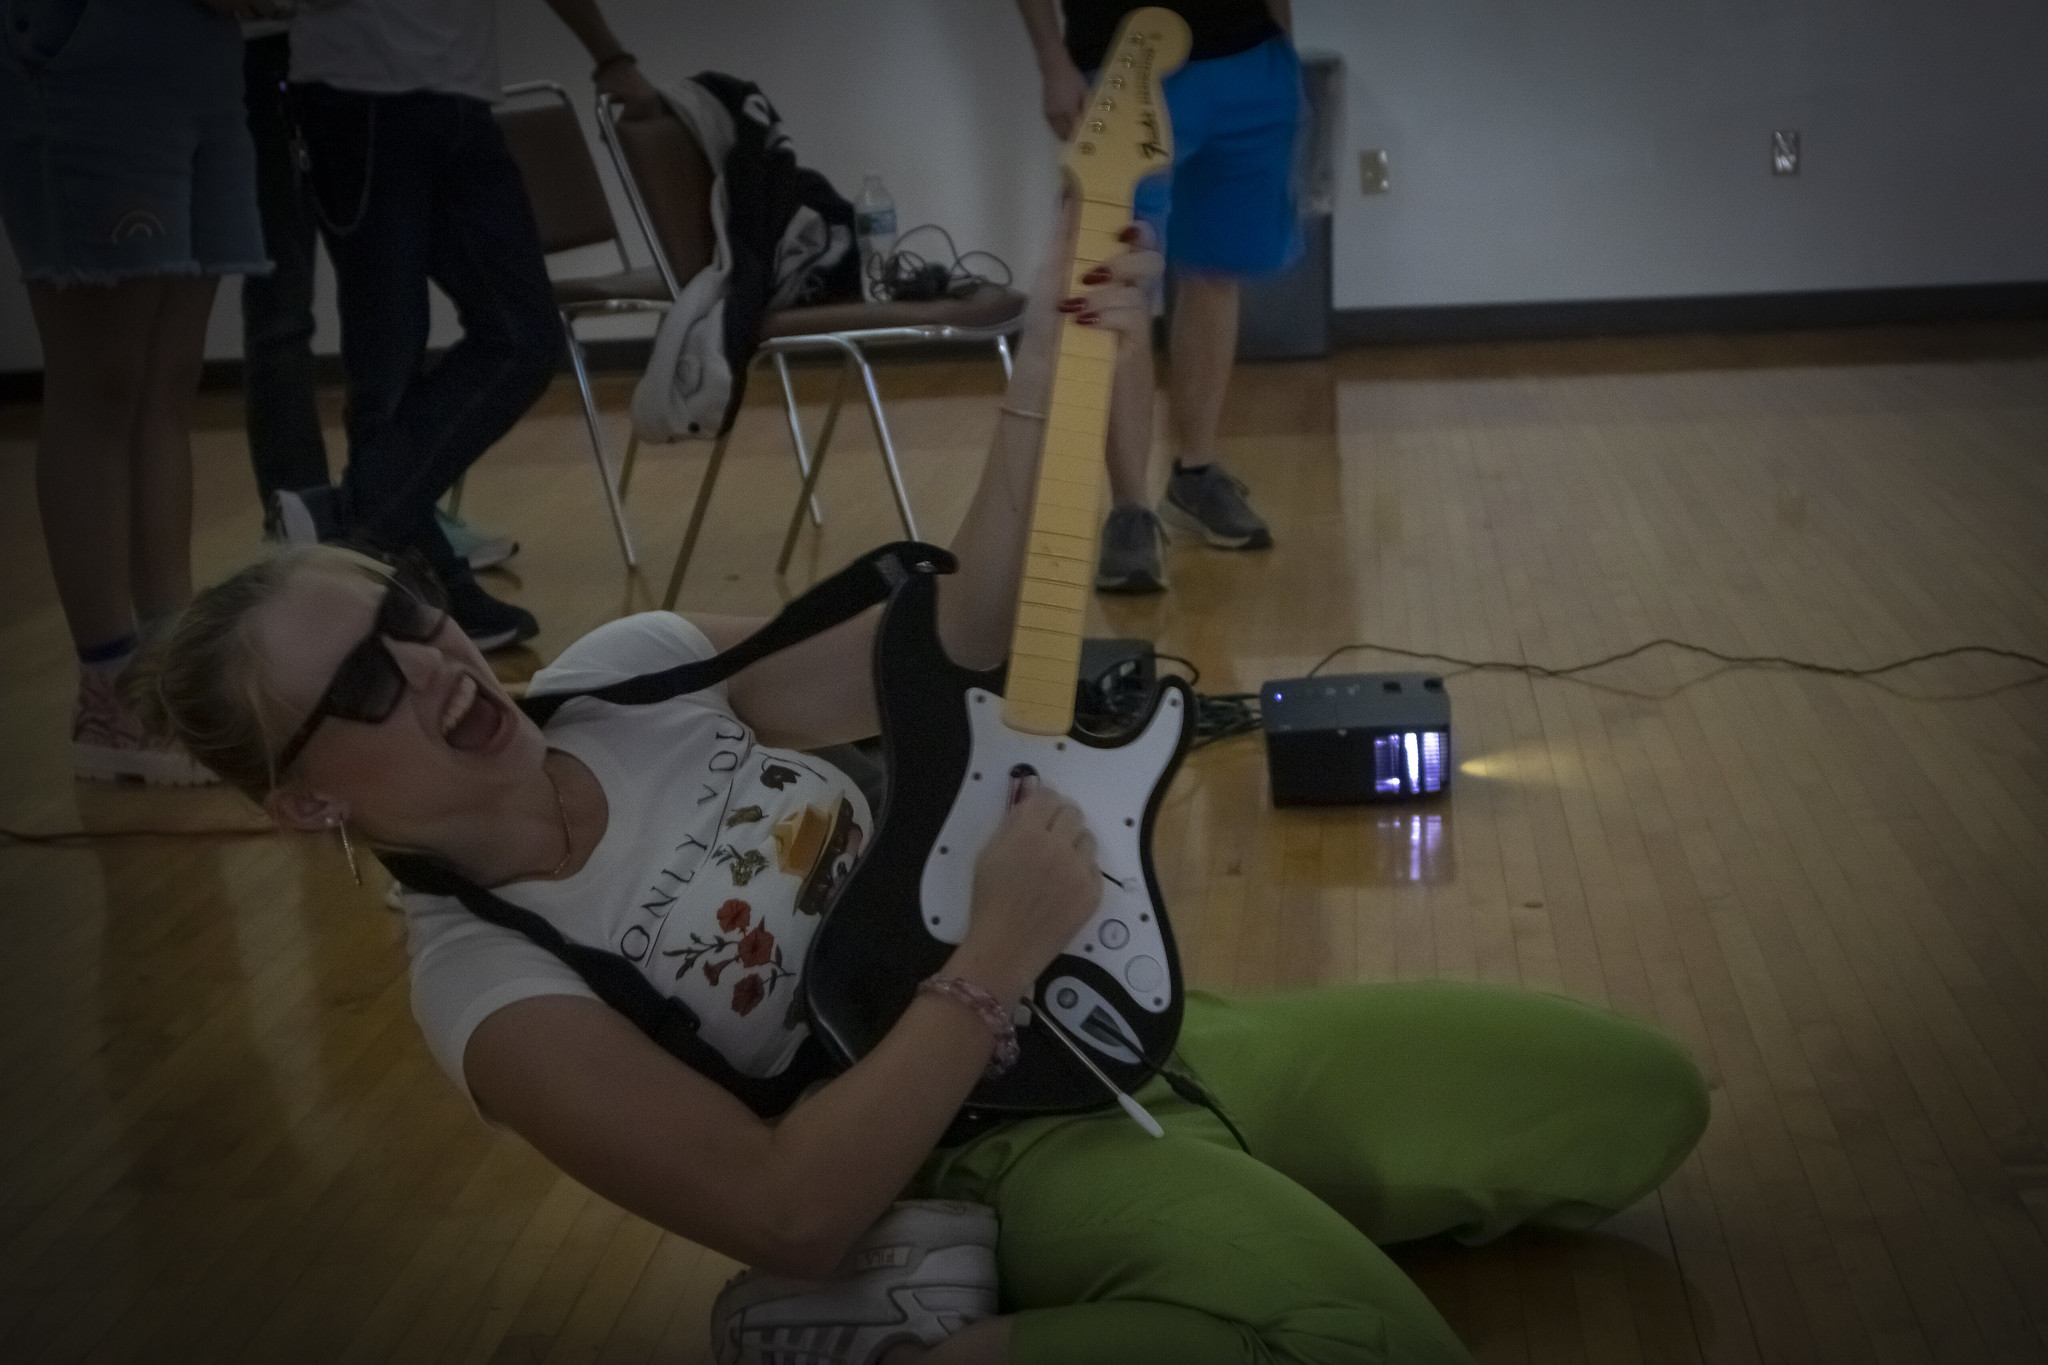 Student rocking out with game guitar